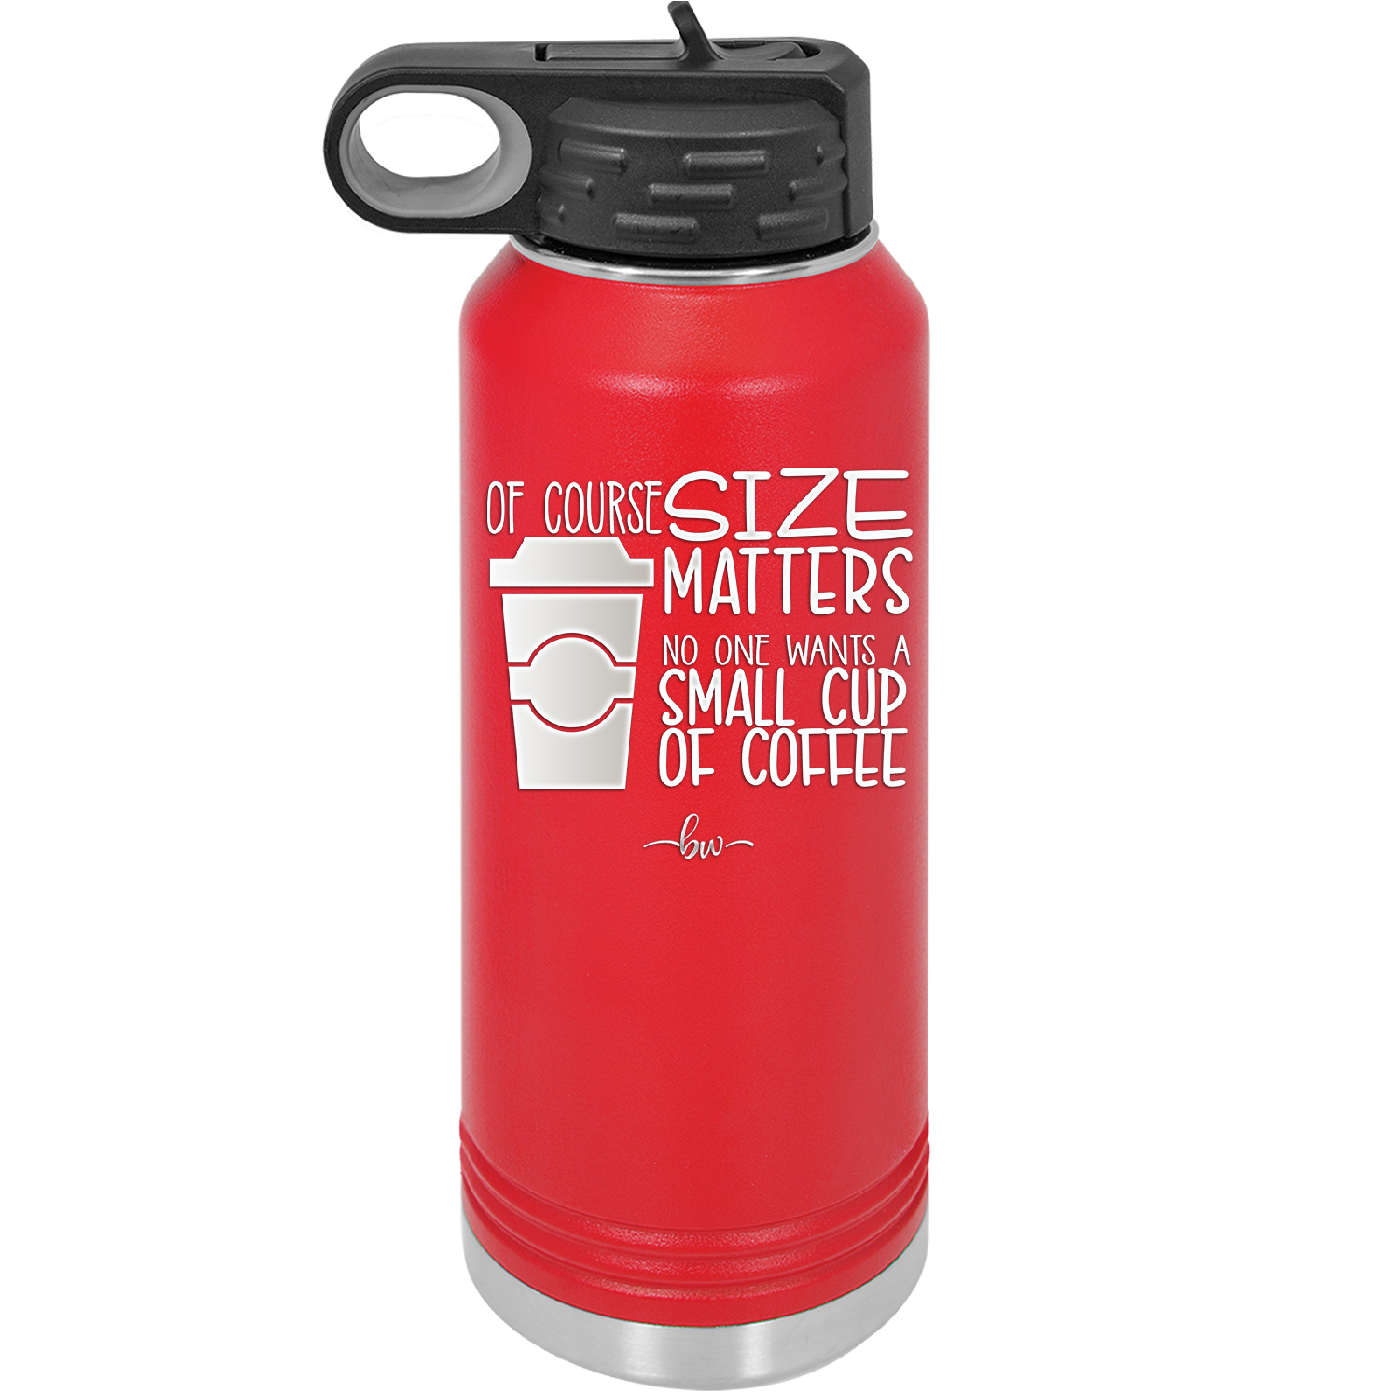 Of Course Size Matters No One Wants a Small Cup of Coffee - Laser Engraved Stainless Steel Drinkware - 2282 -